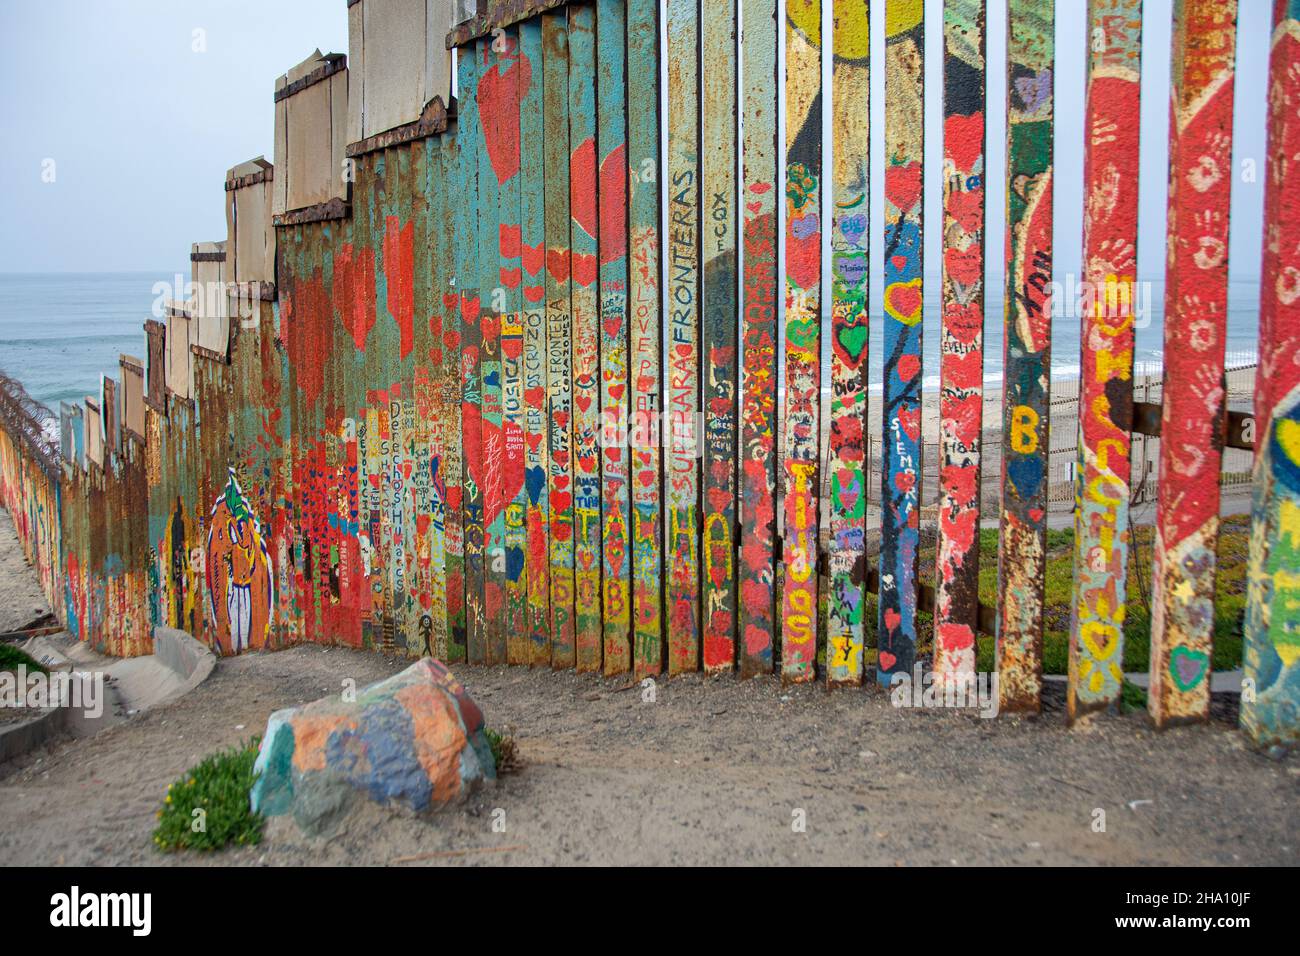 A section of The Wall that separates the United States from Mexico. The view/angle is from the Mexican side of The Wall. Stock Photo